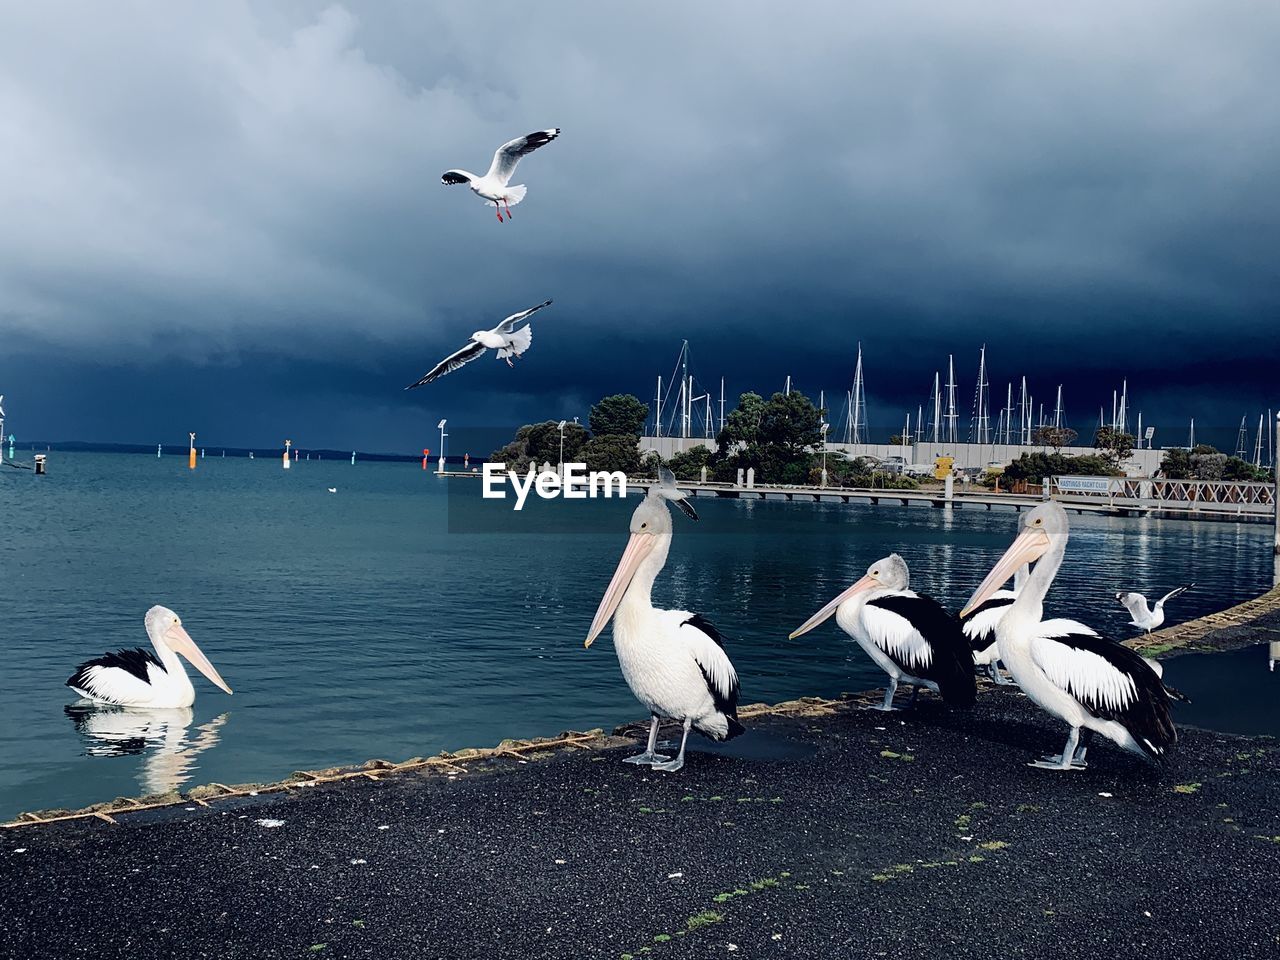 Pelicans before the storm at hastings foreshore